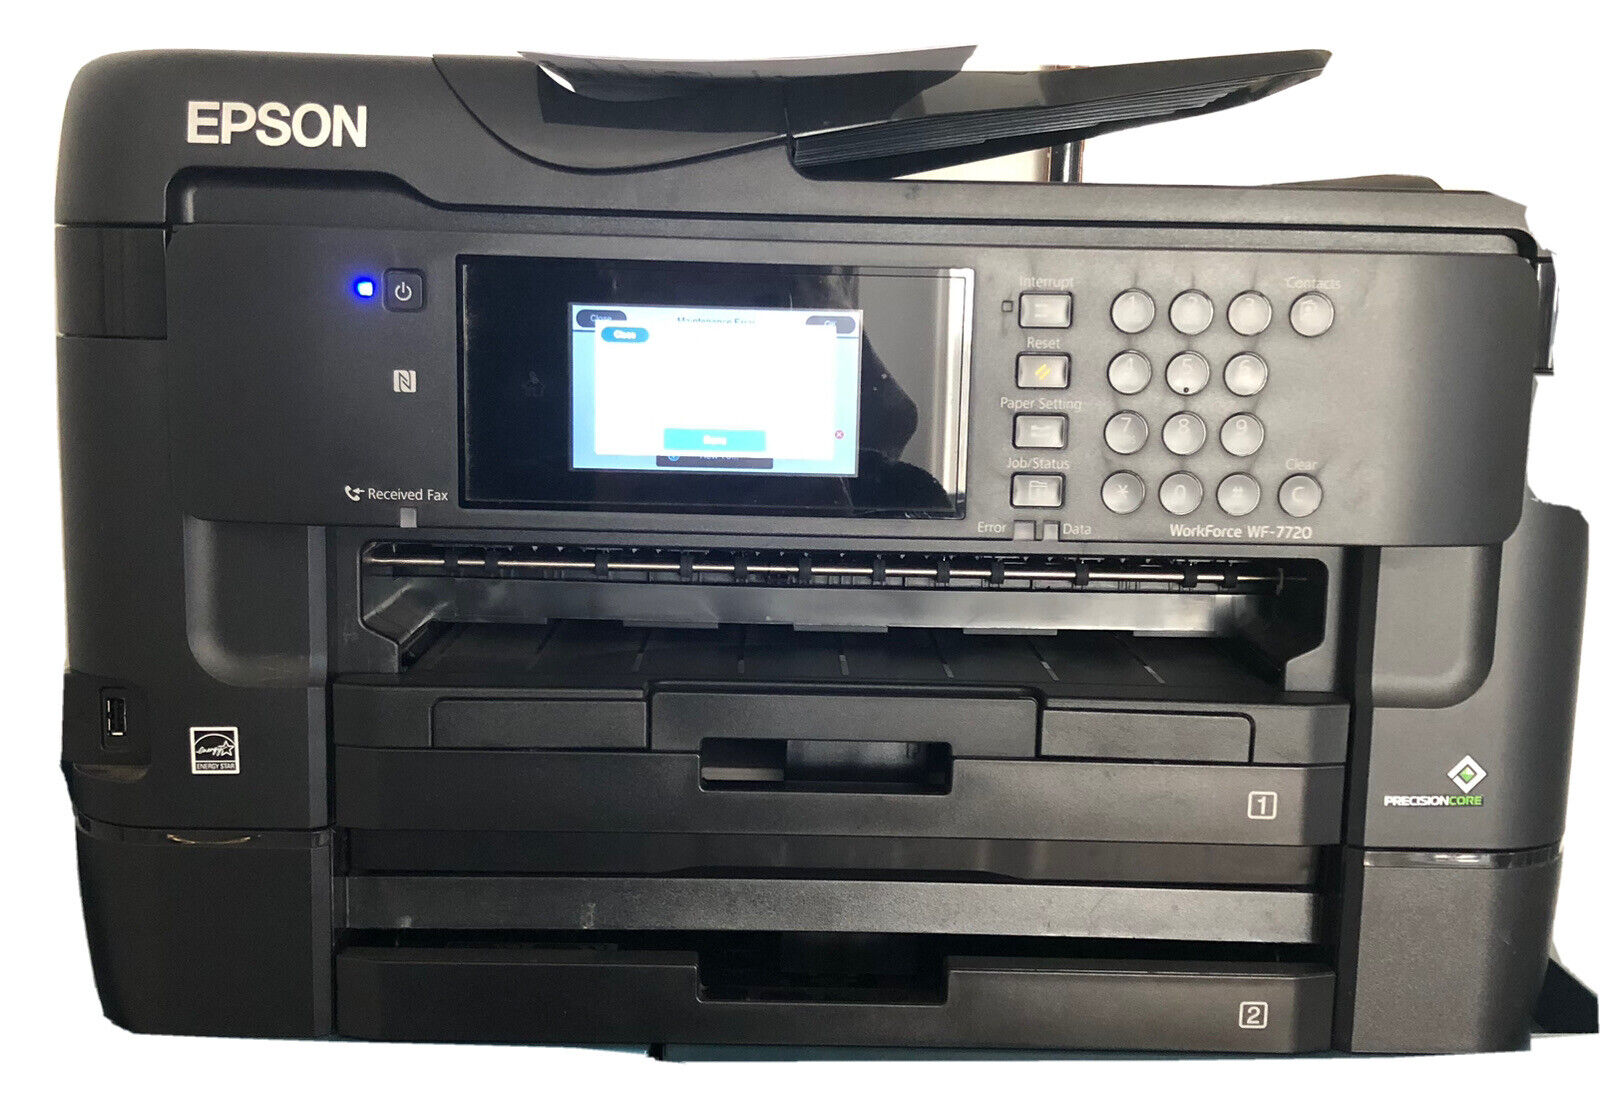 Epson WorkForce WF-7710 7720 All-in-One Inkjet Printer Fantastic Condition Dual